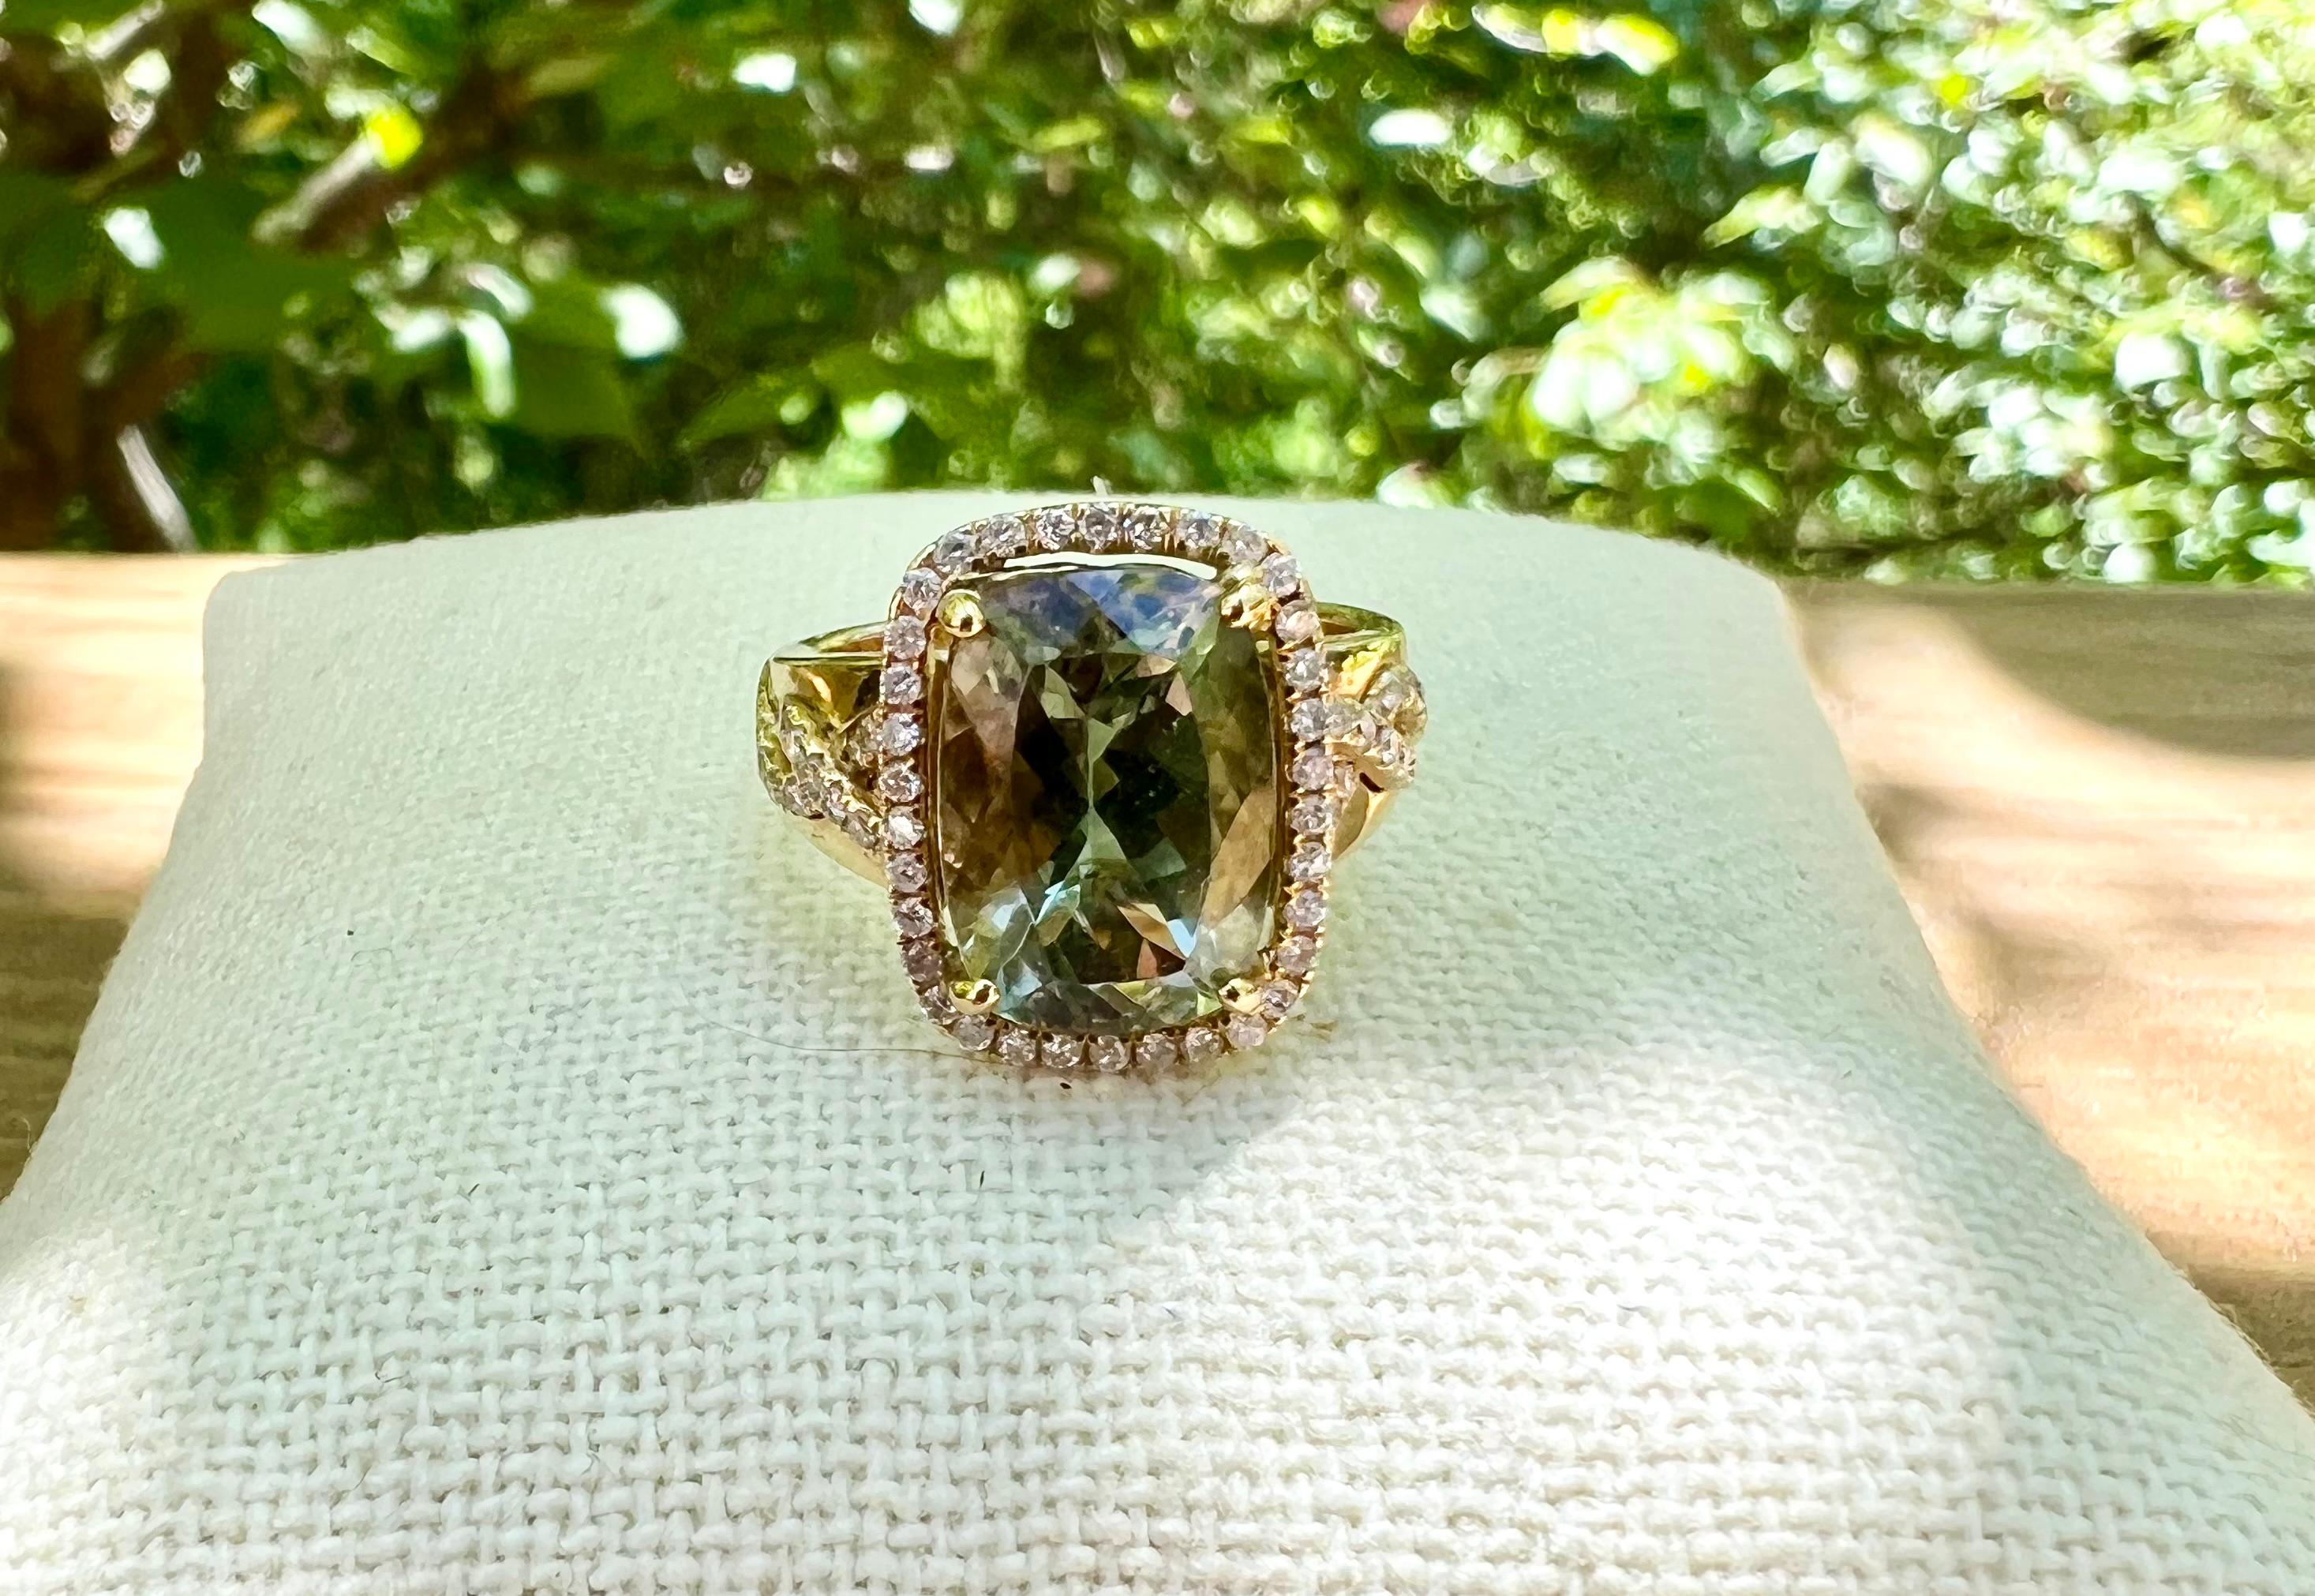 One 14 karat yellow gold ring set with one 13 x 9.25mm cushion cut green andesine surrounded by a halo of 0.62 carat total weight of brilliant-cut diamonds, with matching SI2-I1 clarity.  The ring is a finger size 7 and can be resized. Weighs 8.2